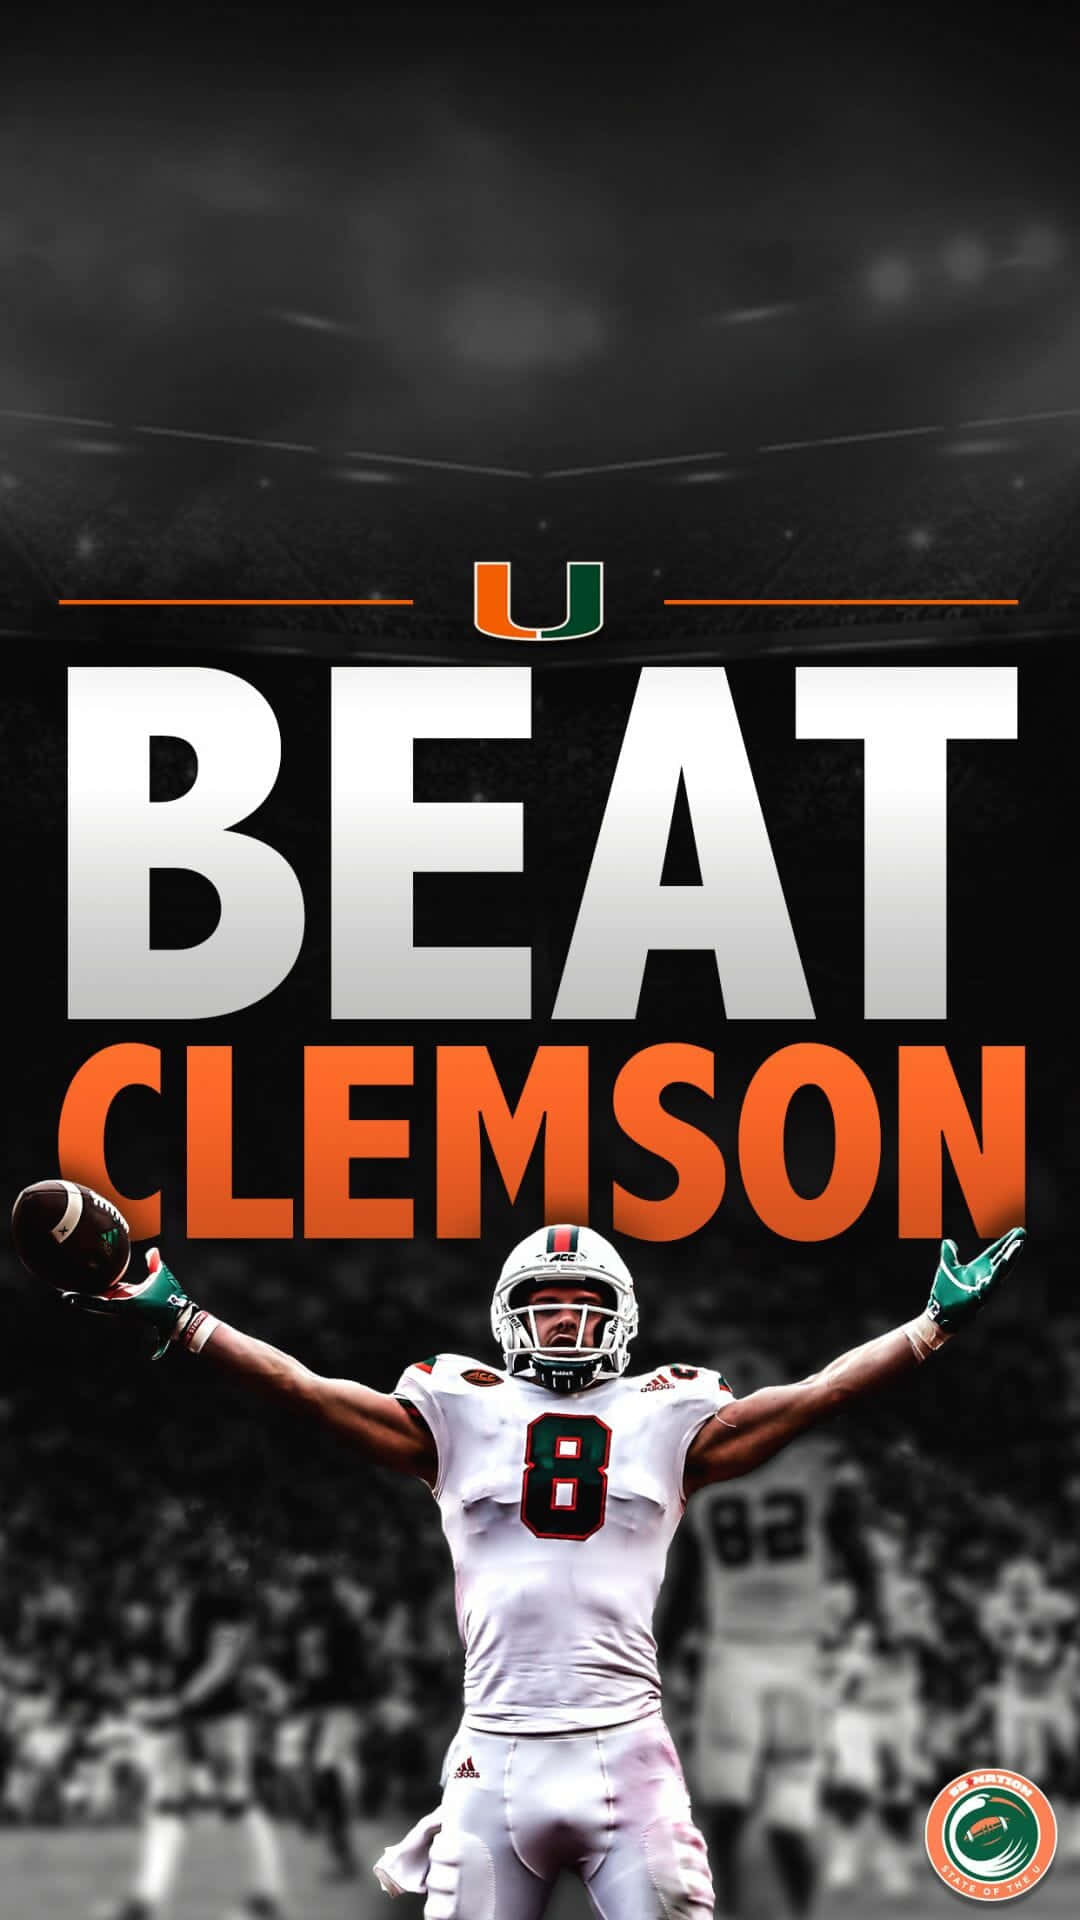 The Miami Hurricanes Showing Their School Pride Wallpaper